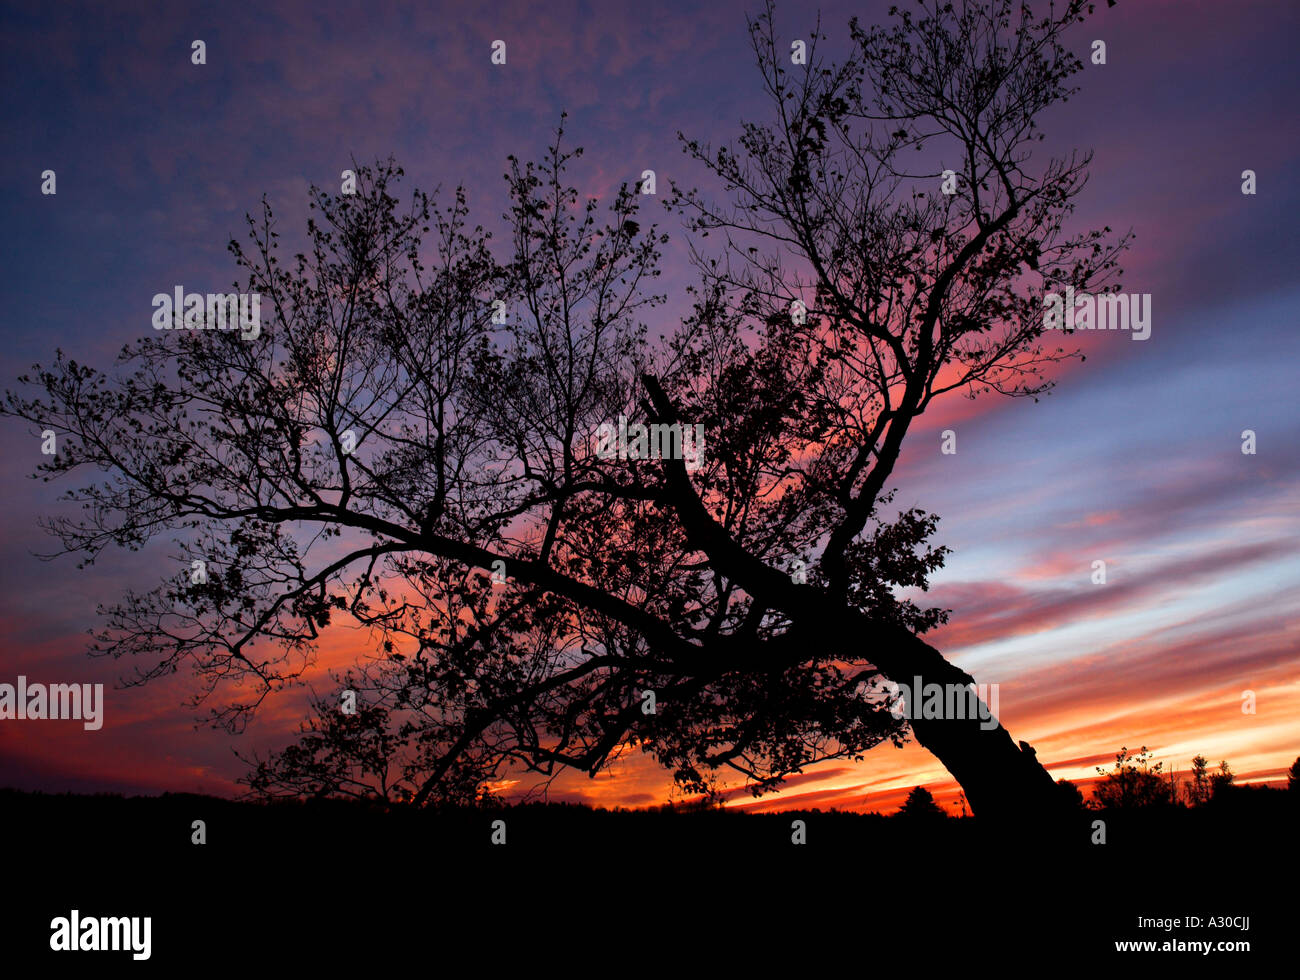 A windswept tree silhouetted against the sunset Stock Photo